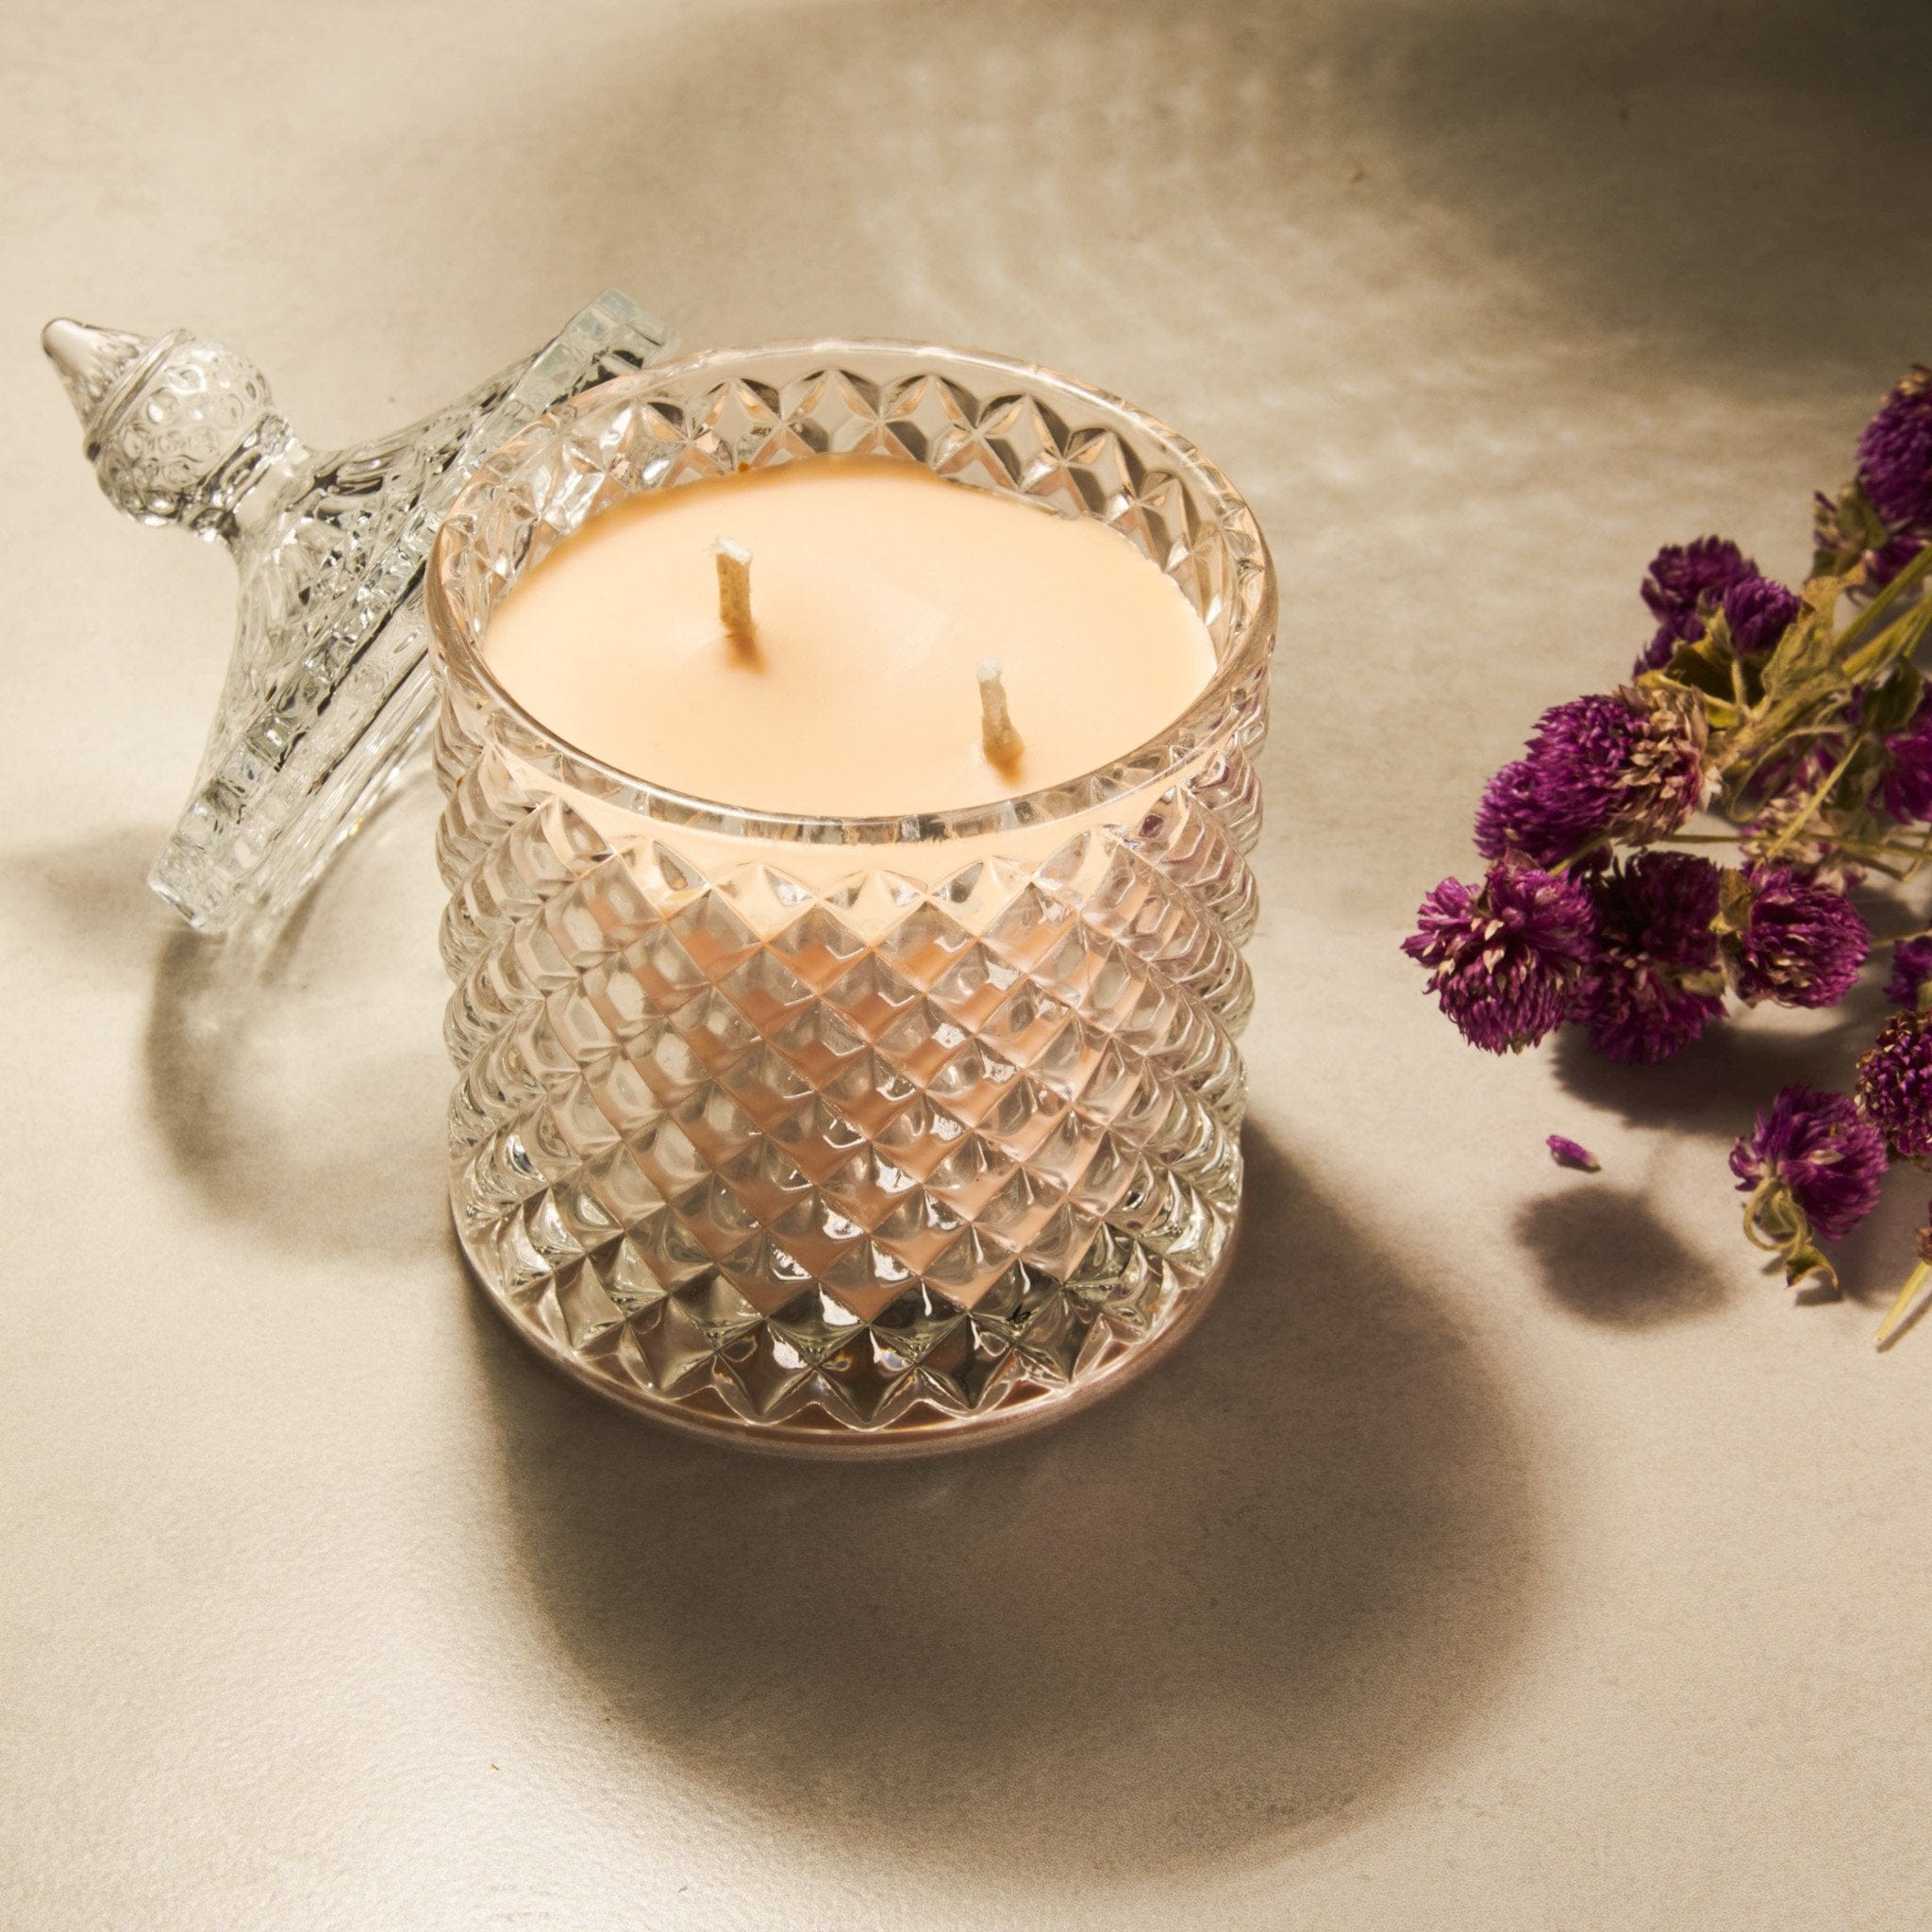 Jasmine Scented Soy Wax Candles. Diwali Gifts for sale online